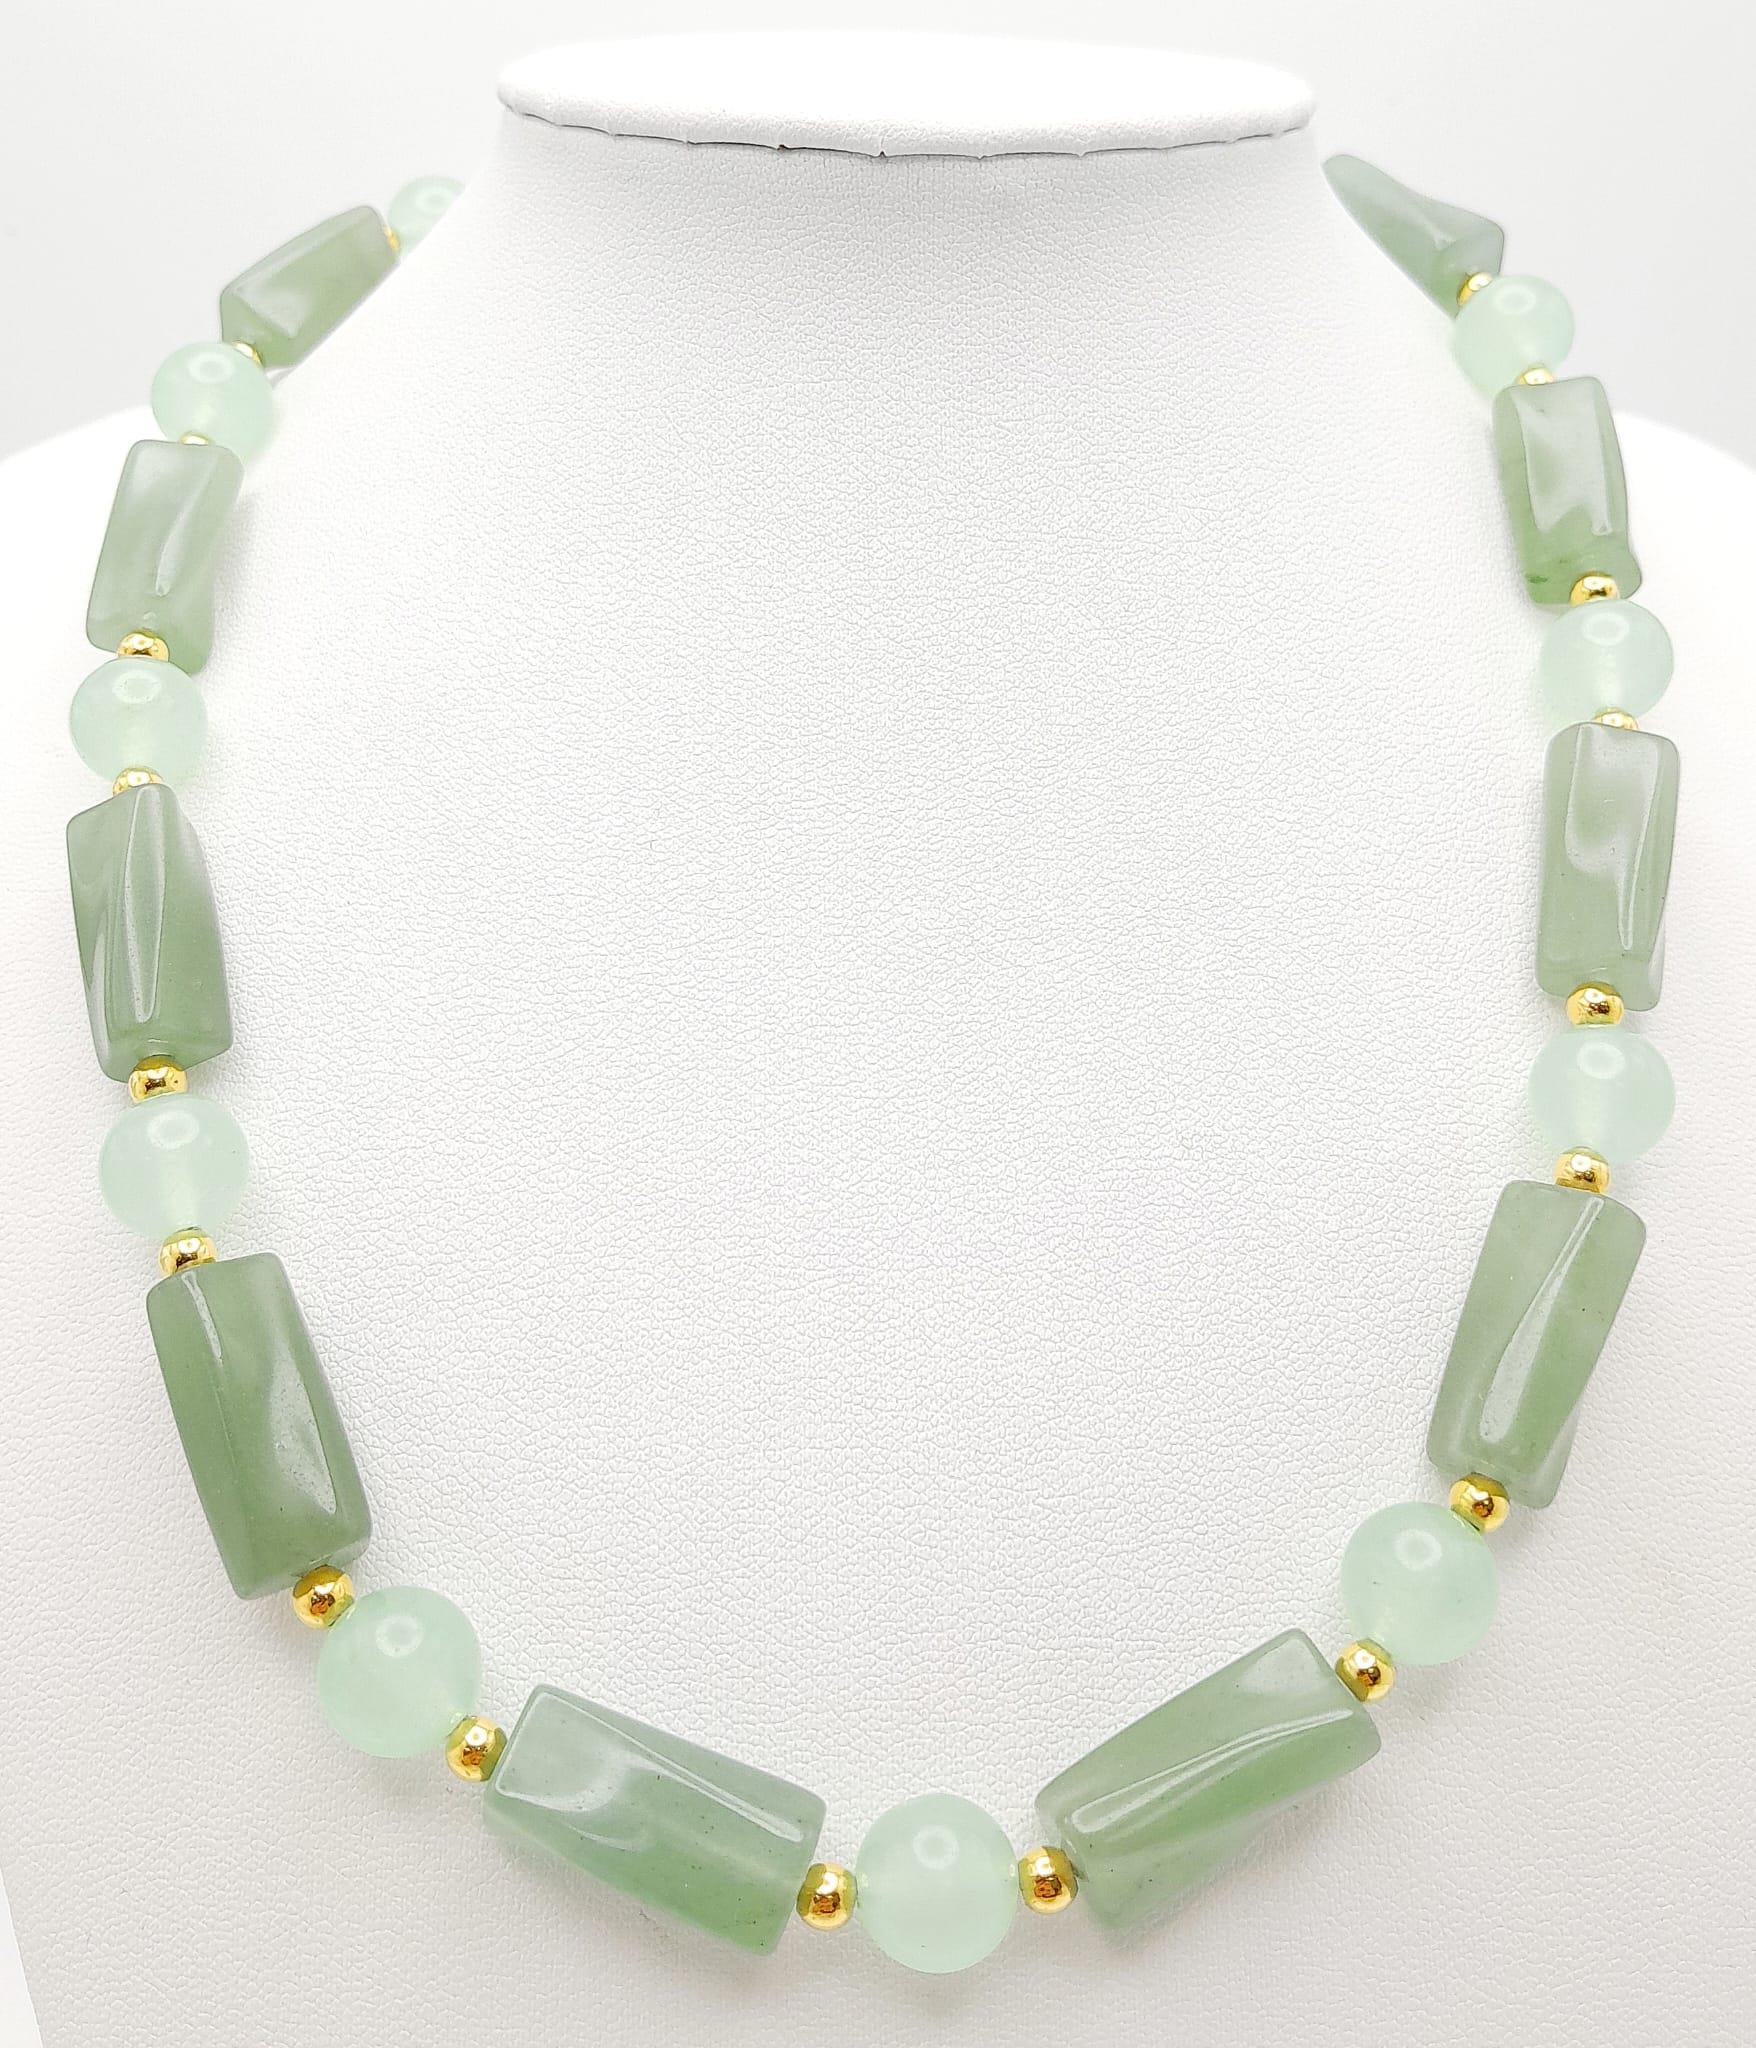 A high-quality light green, semi-translucent, jade necklace, bracelet and earrings set. Necklace - Image 3 of 5